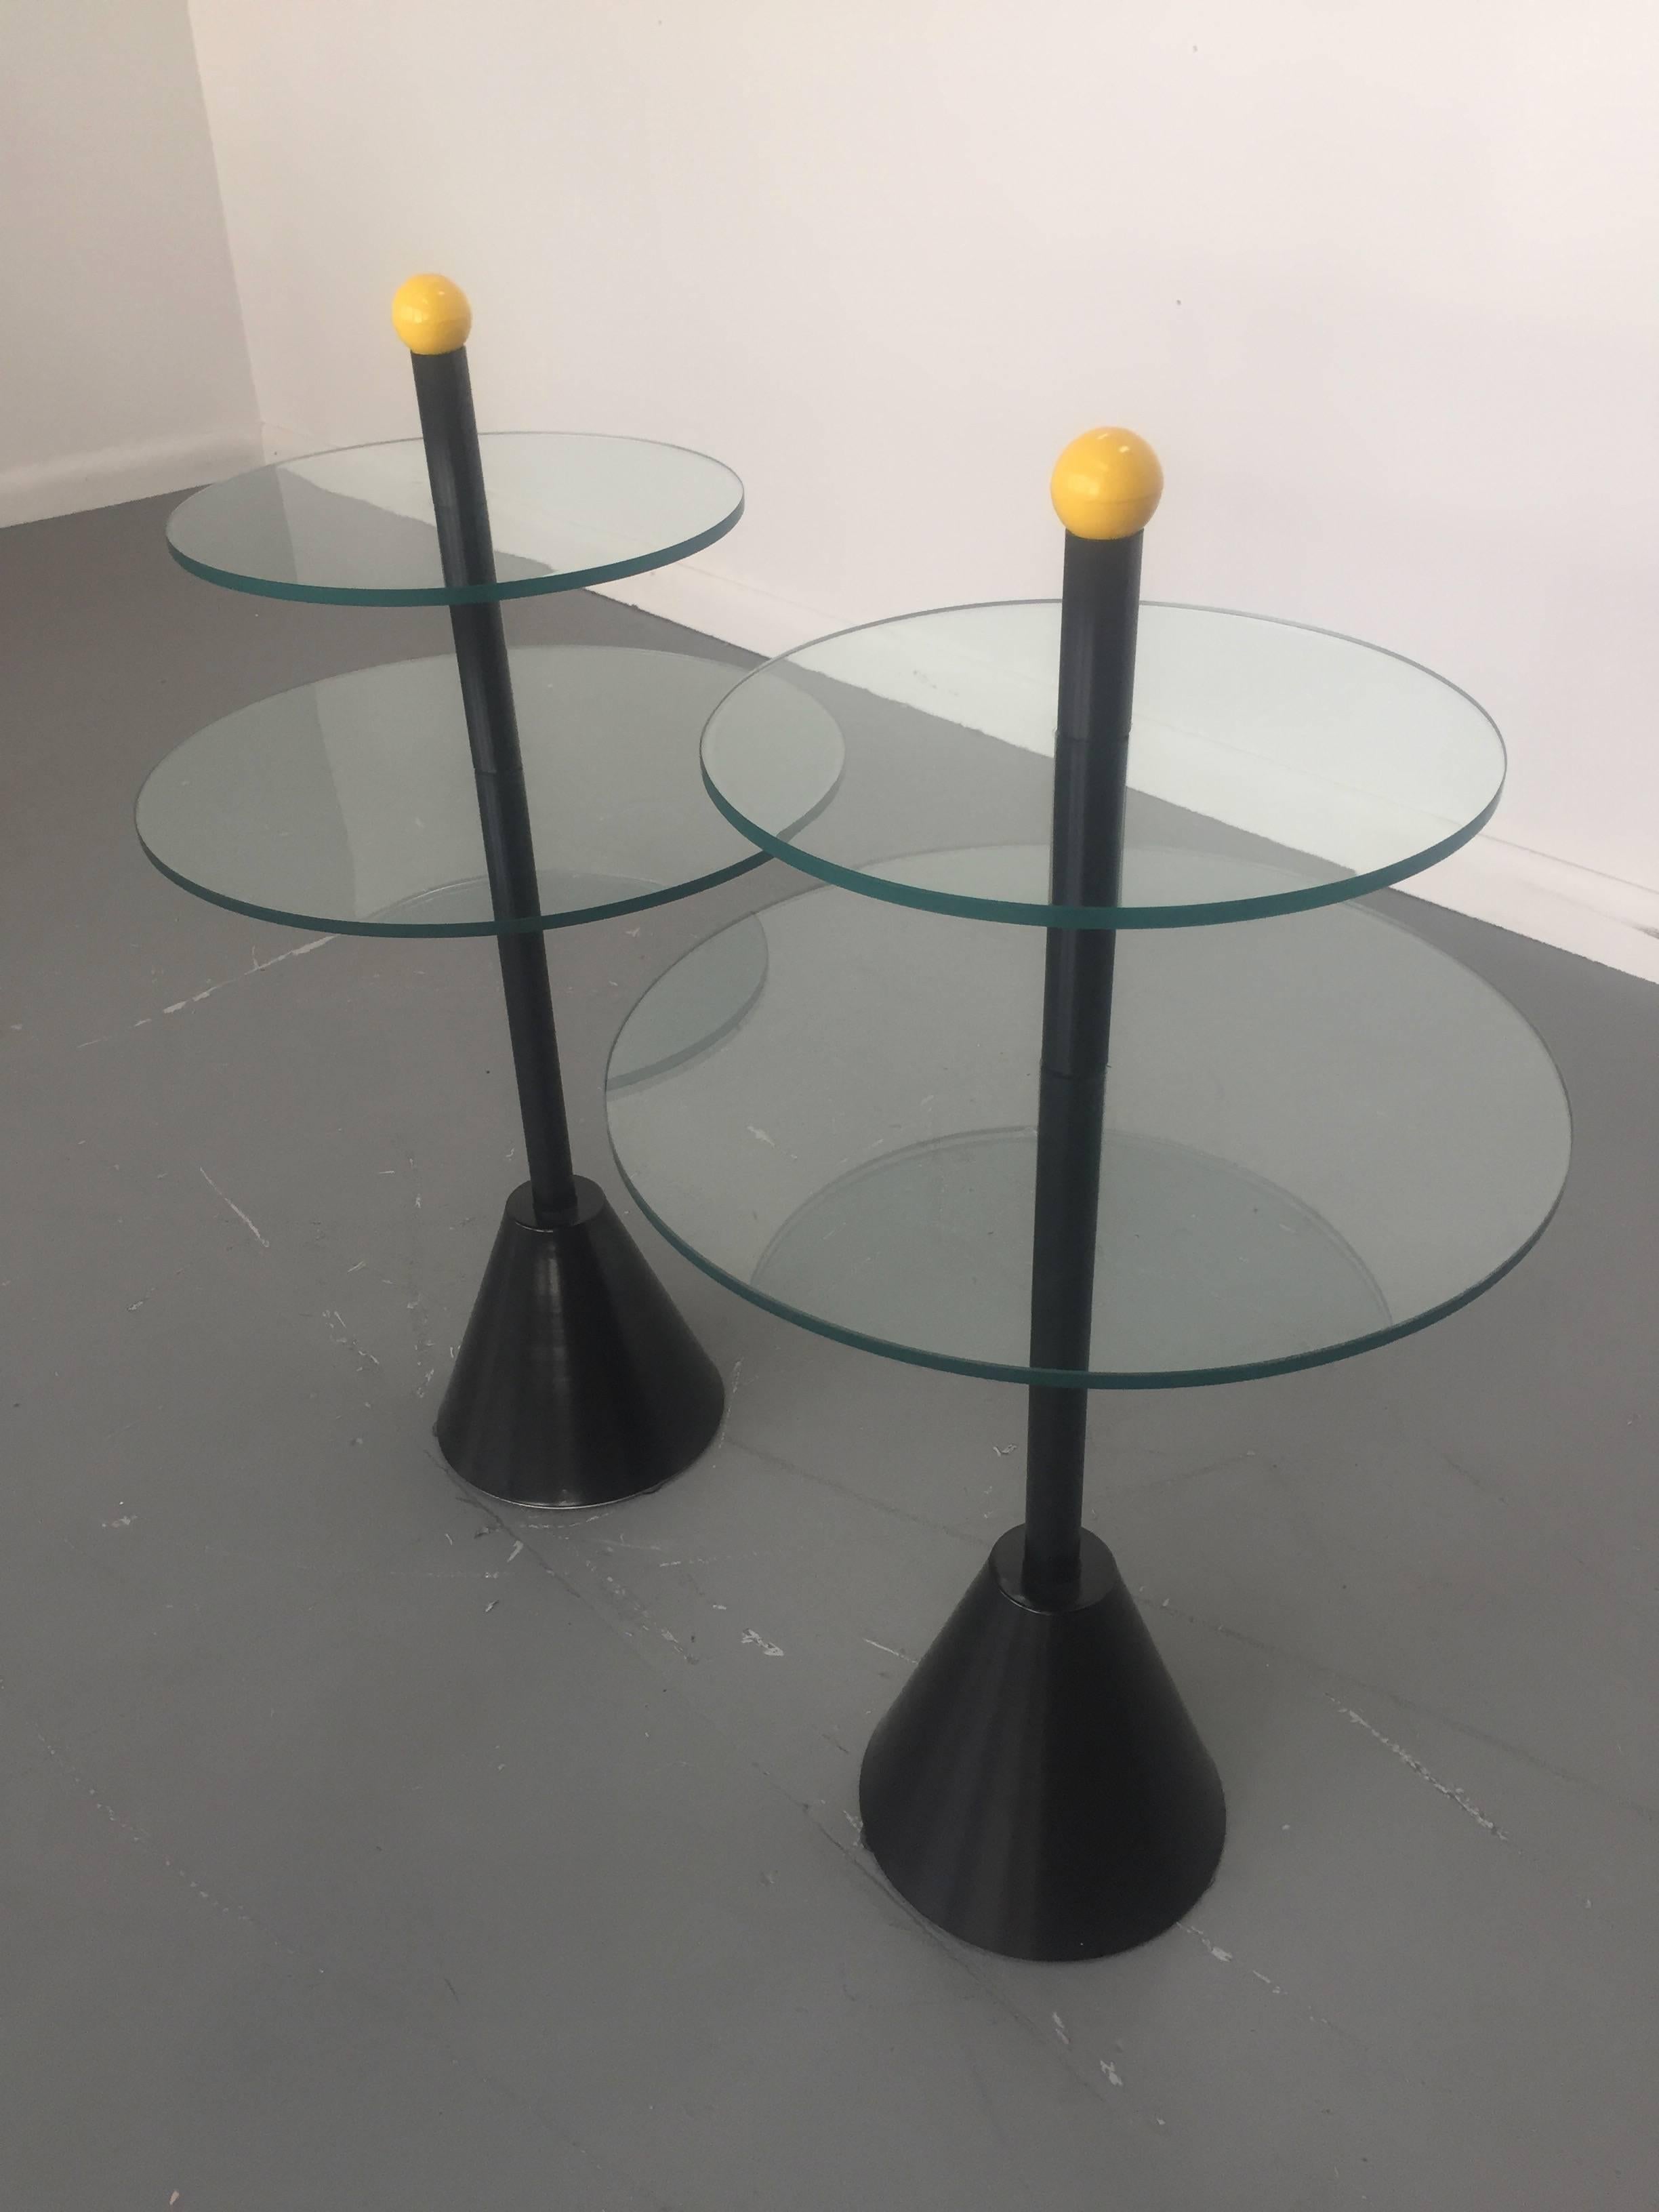 These side tables have received a new coat of black enamel with two tiers of glass and a playful splash of yellow on top. These Memphis tables are in the style of Sottass, de Lucchi, Shire, Zannini. 


